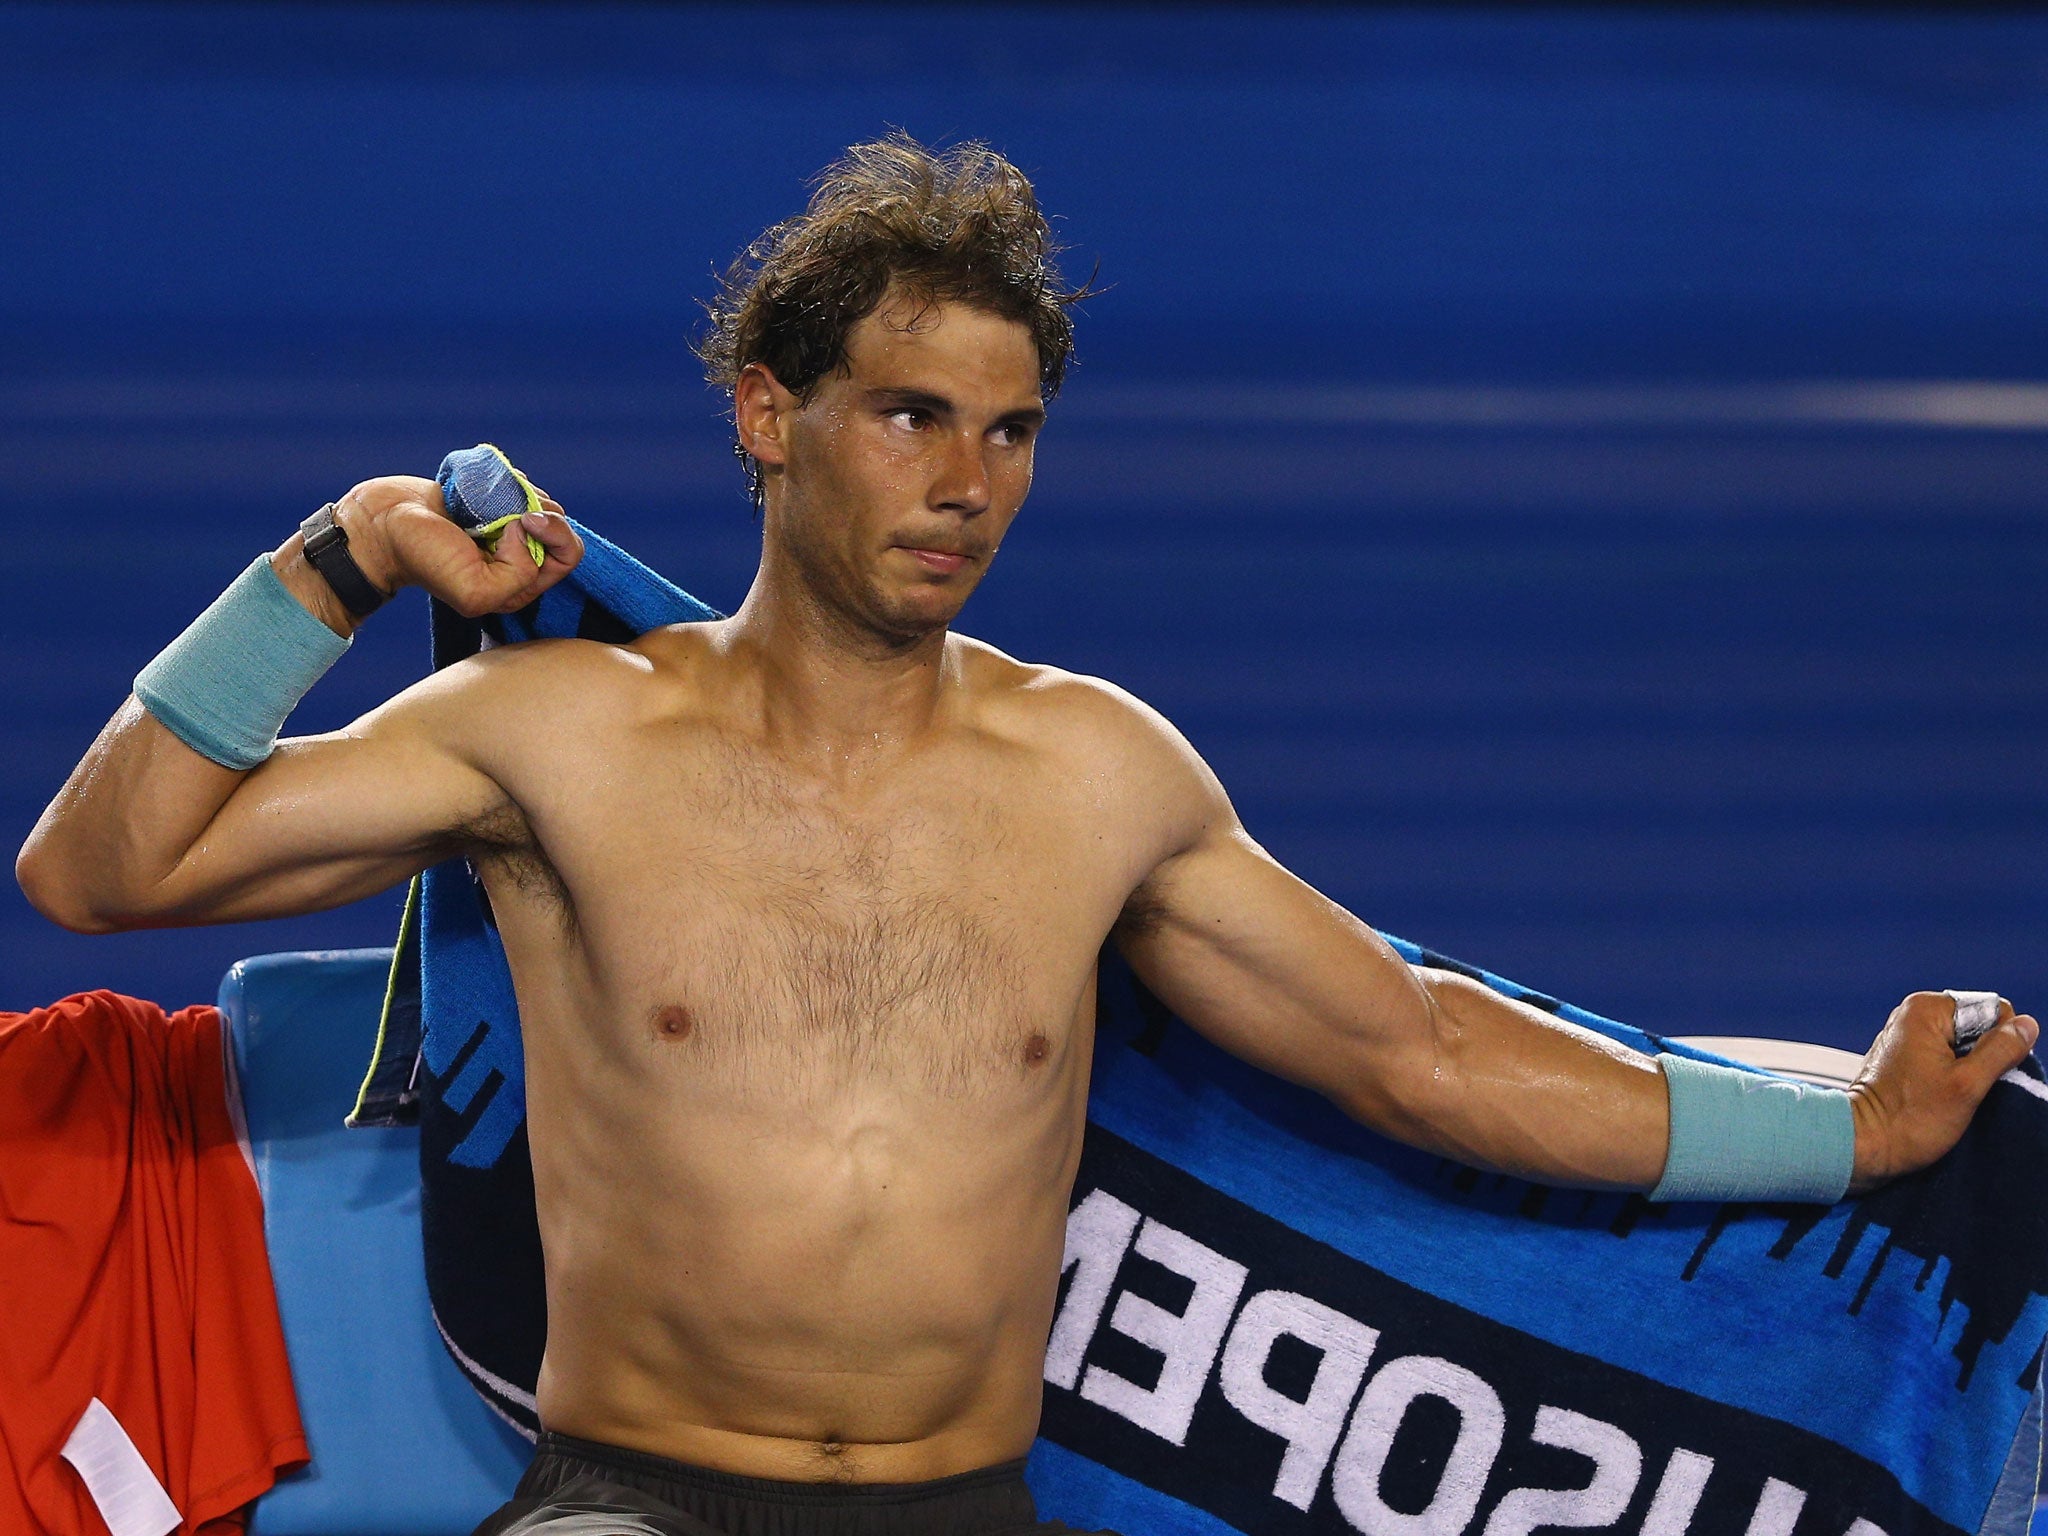 Rafael Nadal tries to cool himself down while on court at the Australian Open